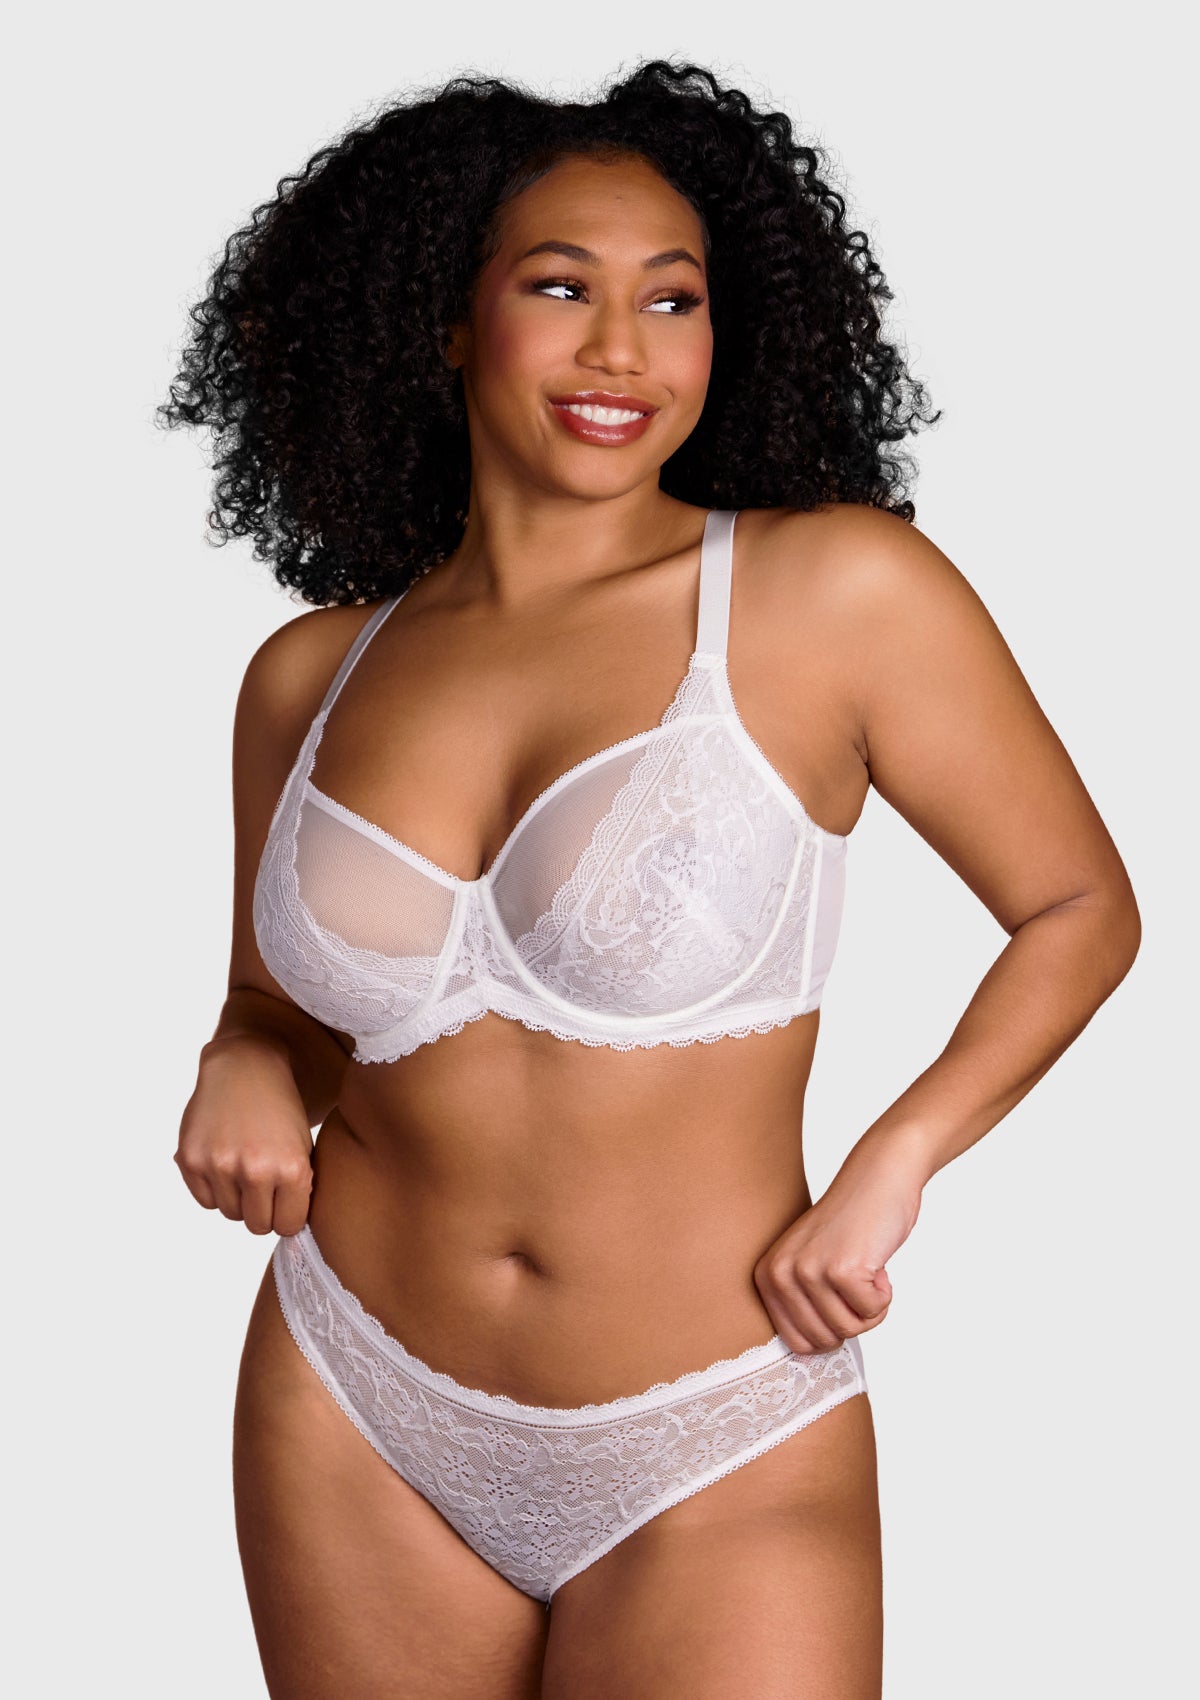 HSIA Anemone Big Bra: Best Bra For Lift And Support, Floral Bra - Light Blue / 40 / C